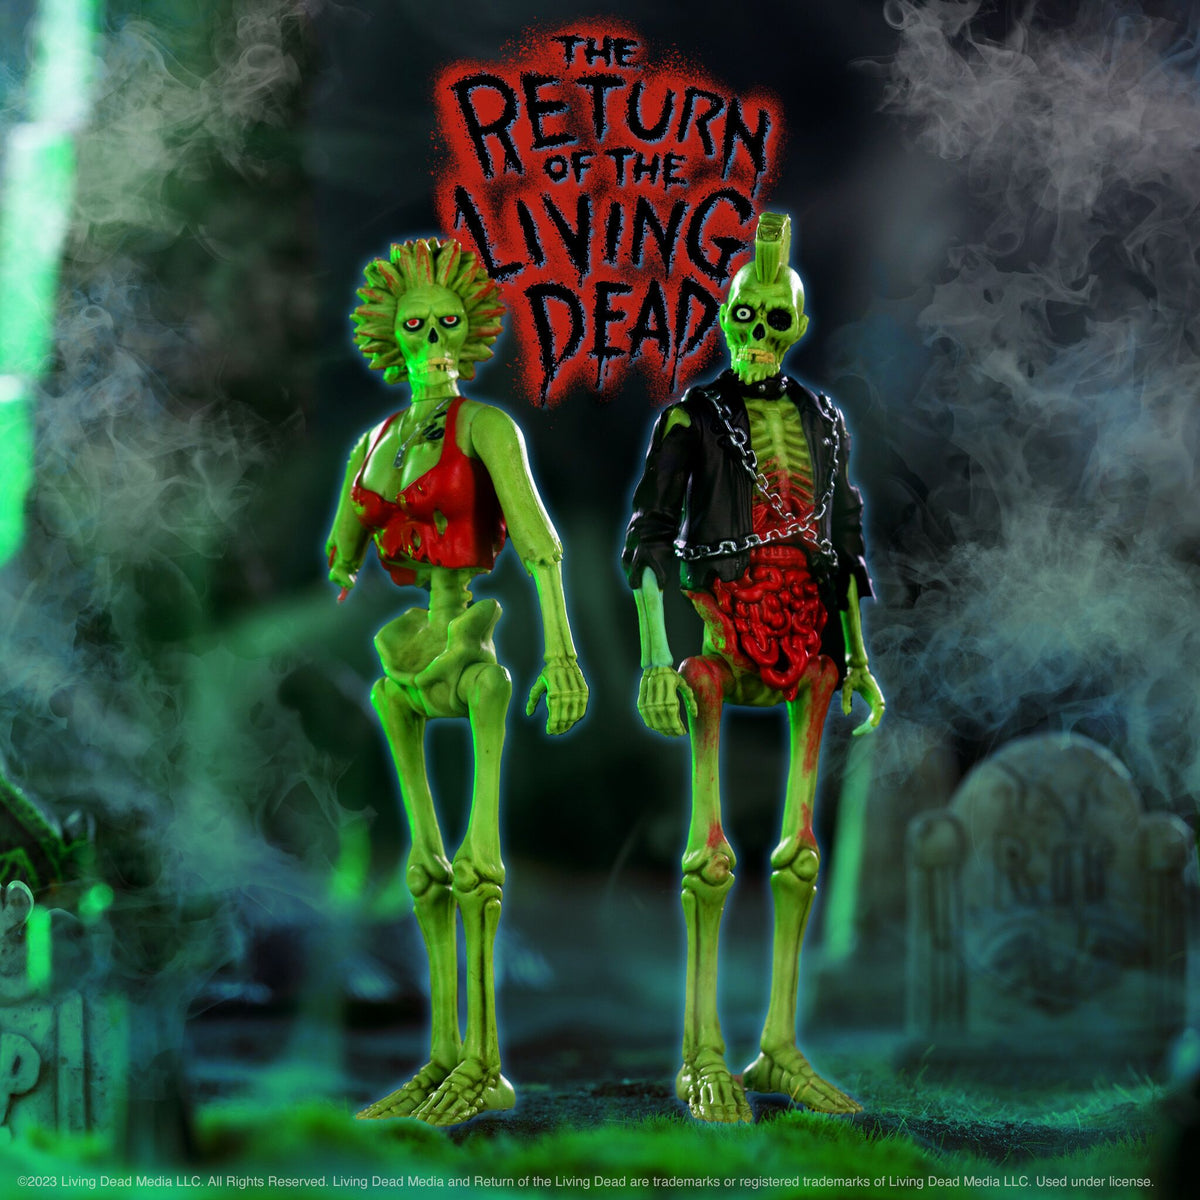 RETURN OF THE ZOMBIES